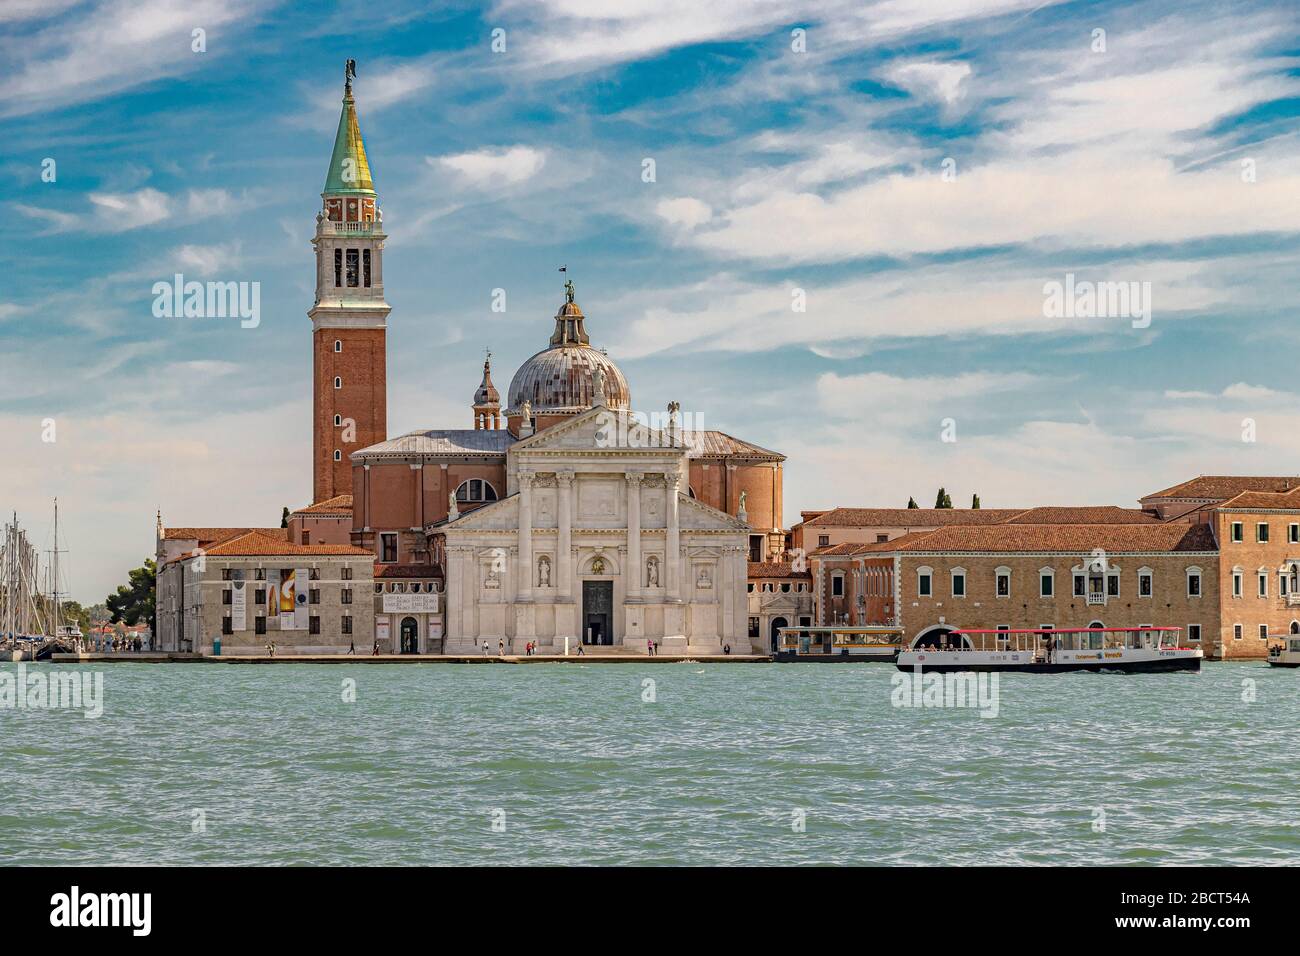 Set on an island San Giorgio Maggiore is a 16th century Benedictine church in Venice,The bell tower offers superb views of Venice and surrounding area Stock Photo